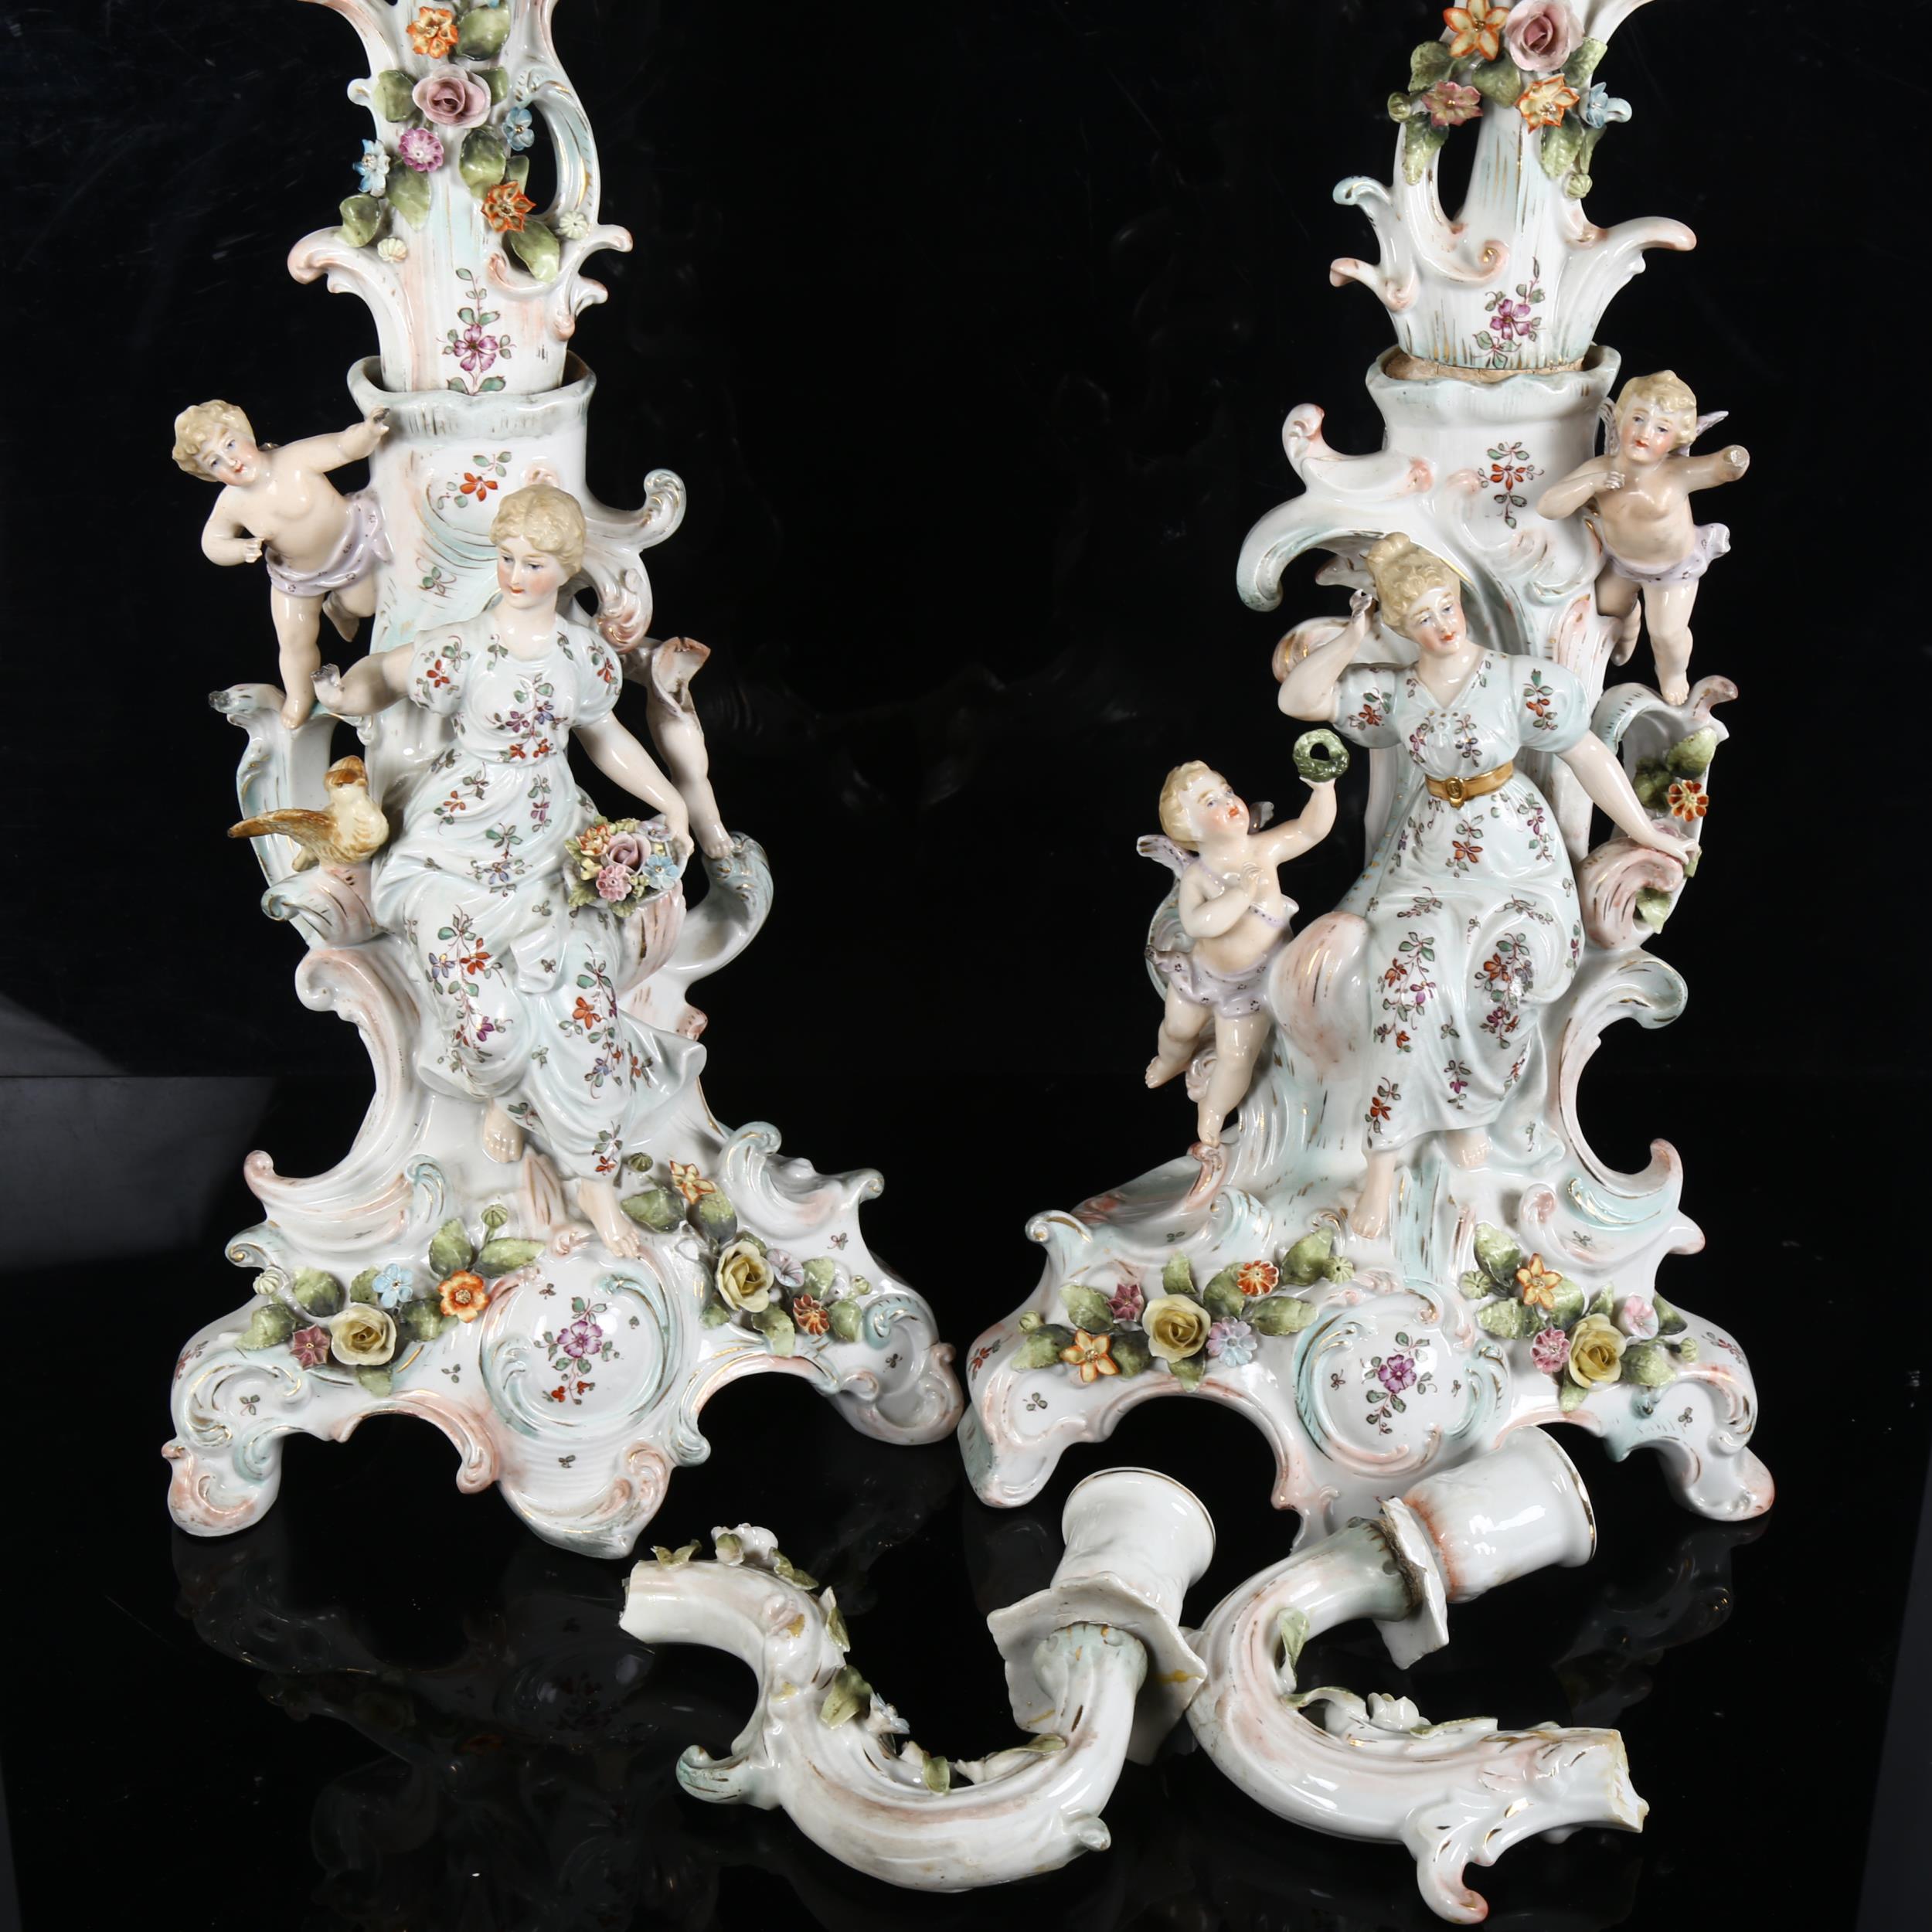 A pair of Antique German 6-branch table candelabras, encrusted with painted flowers, figures and - Image 2 of 2